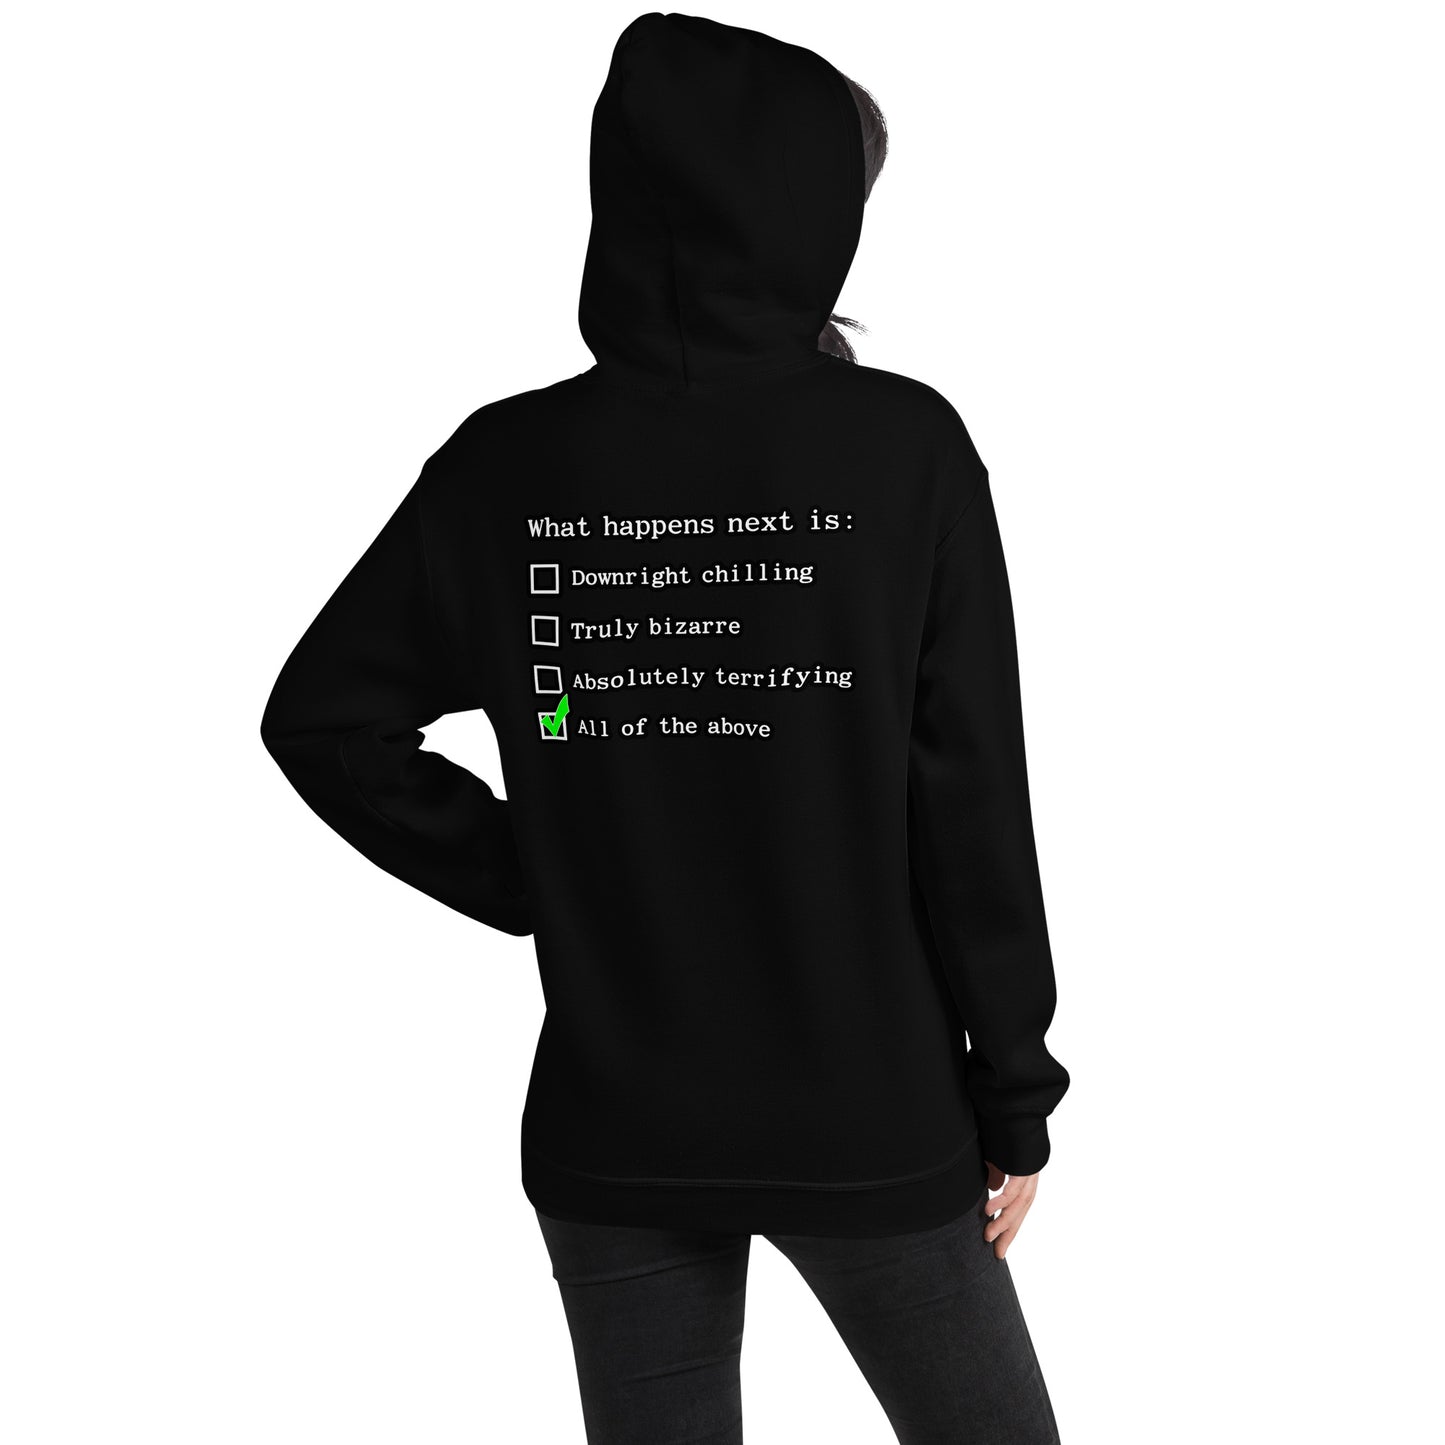 Nuke's Top 5 Checklist Hoodie TWO SIDED